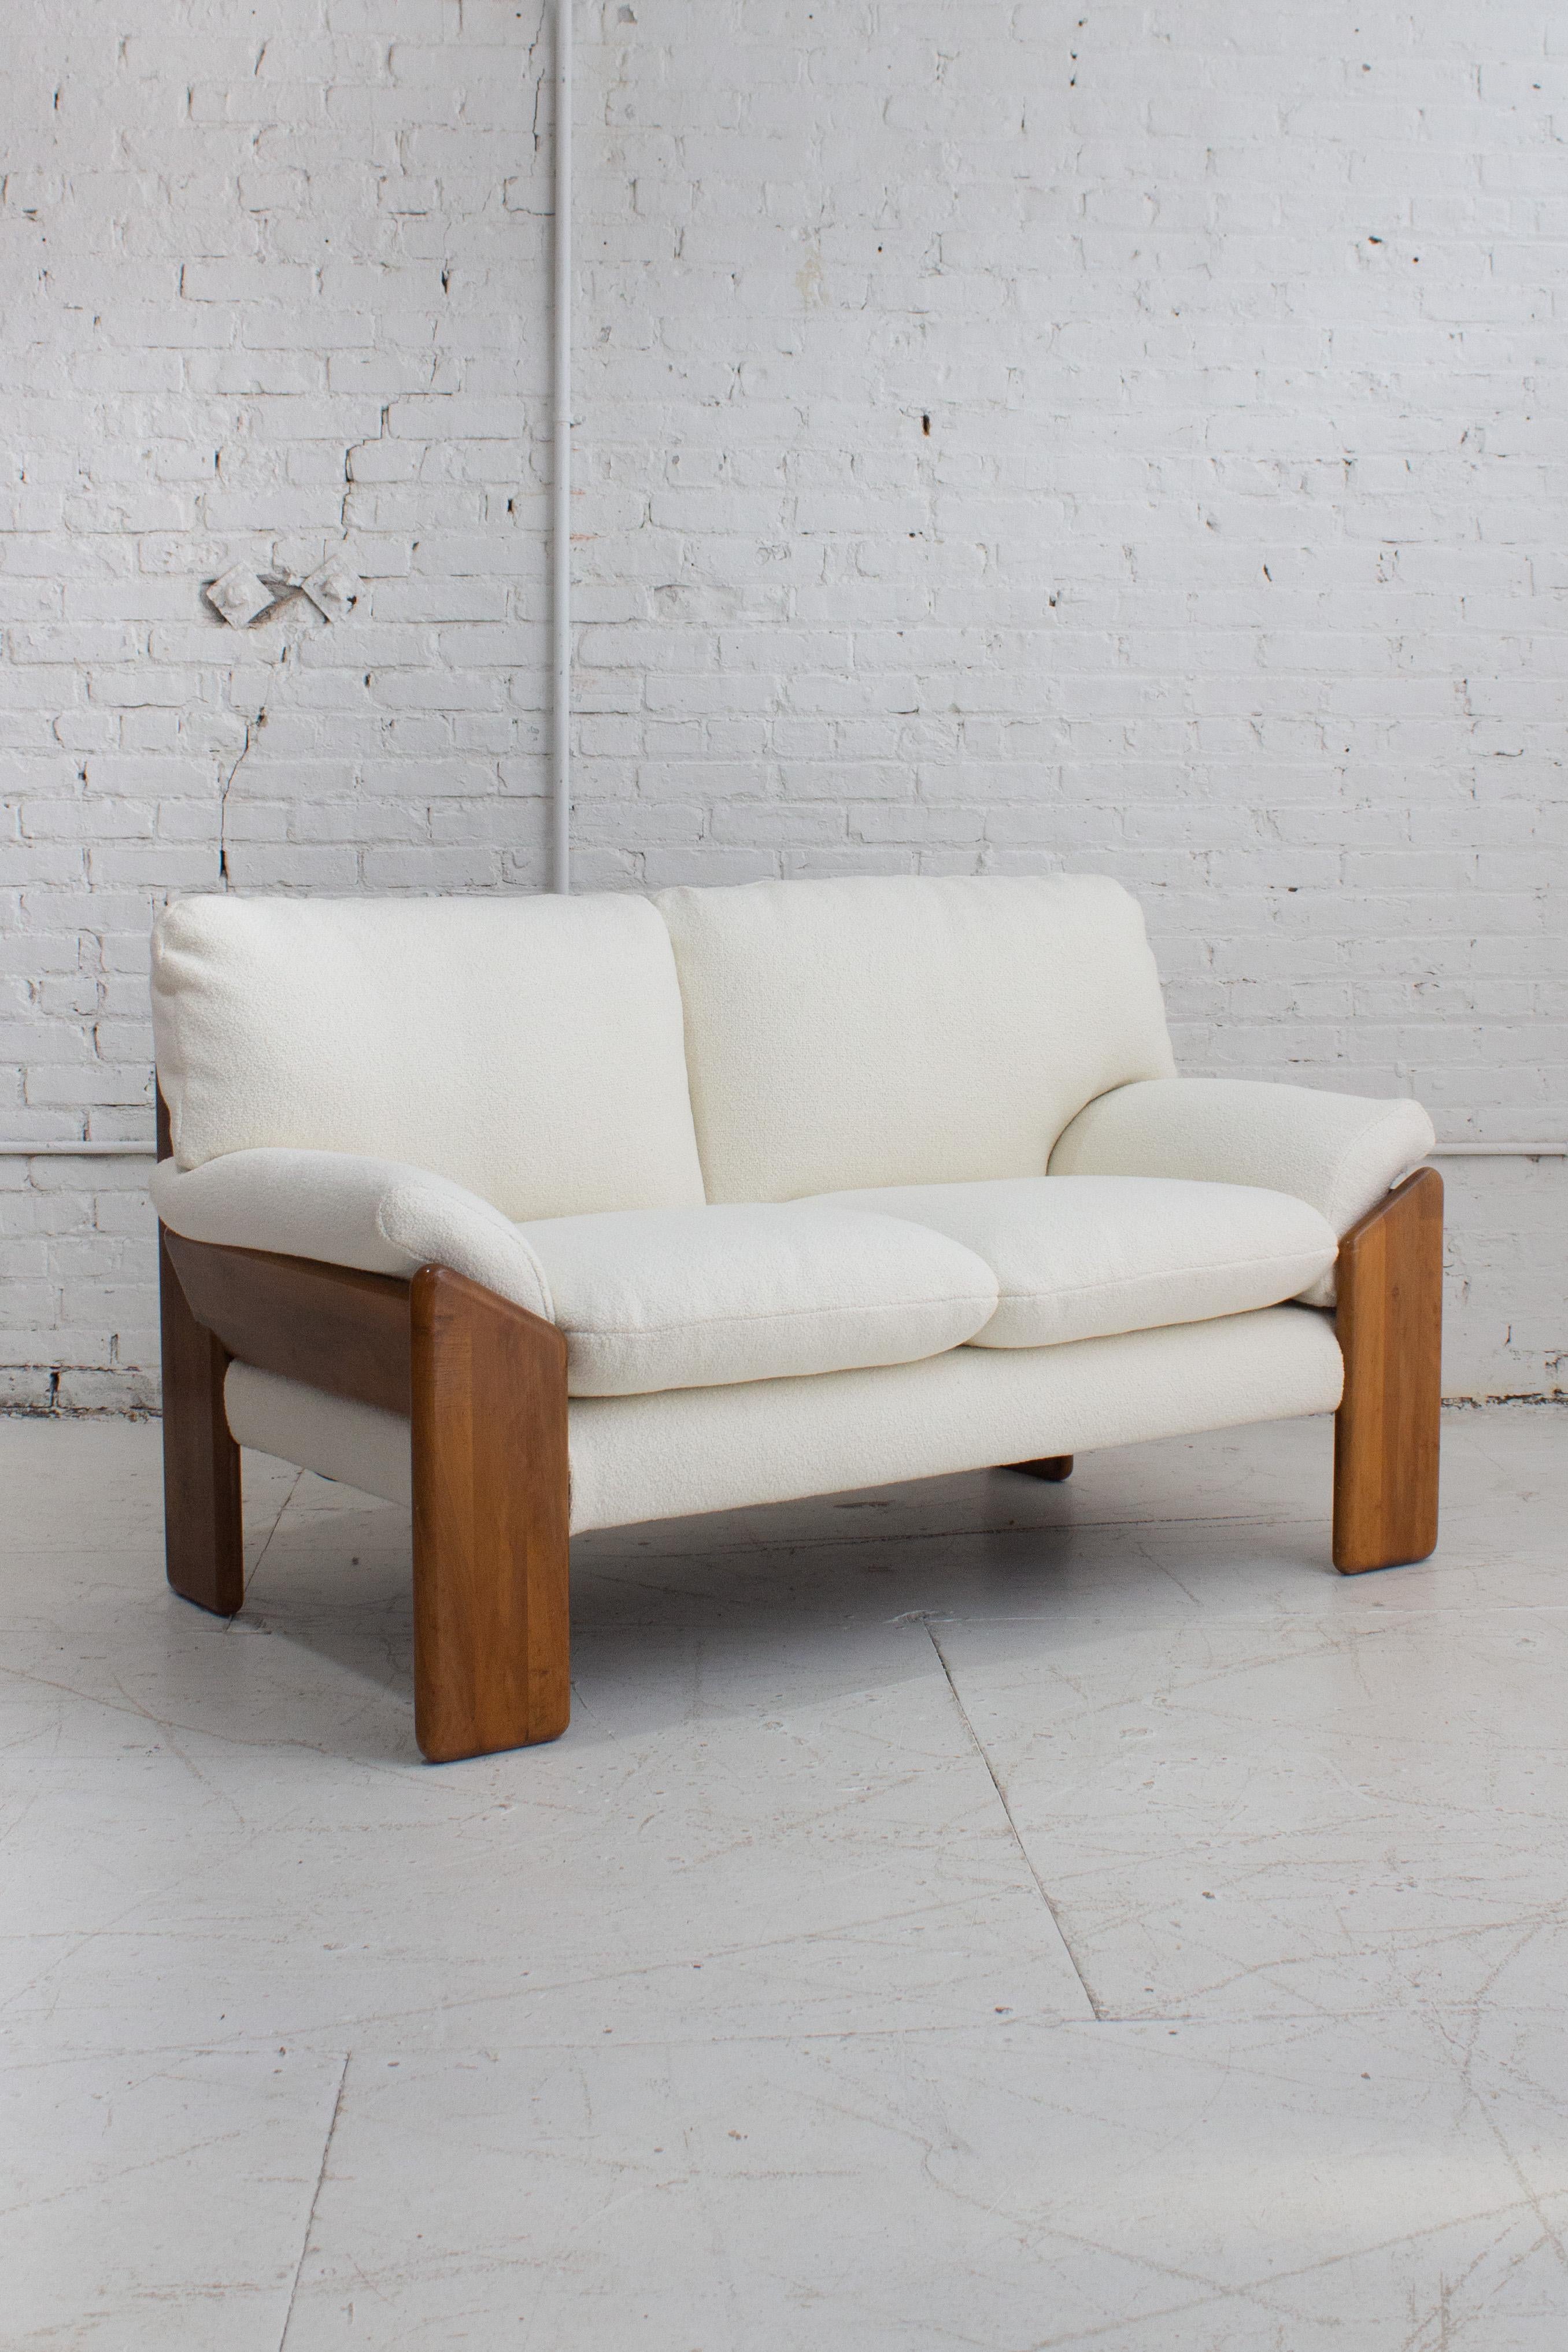 A 'Sapporo' two seat sofa designed by Mario Marenco for Mobil Girgi. A solid wood frame holds six removable cushions. Newly reupholstered in a textured cream fabric. Stamped “Mobil Girgi.” Sourced in Northern Italy.